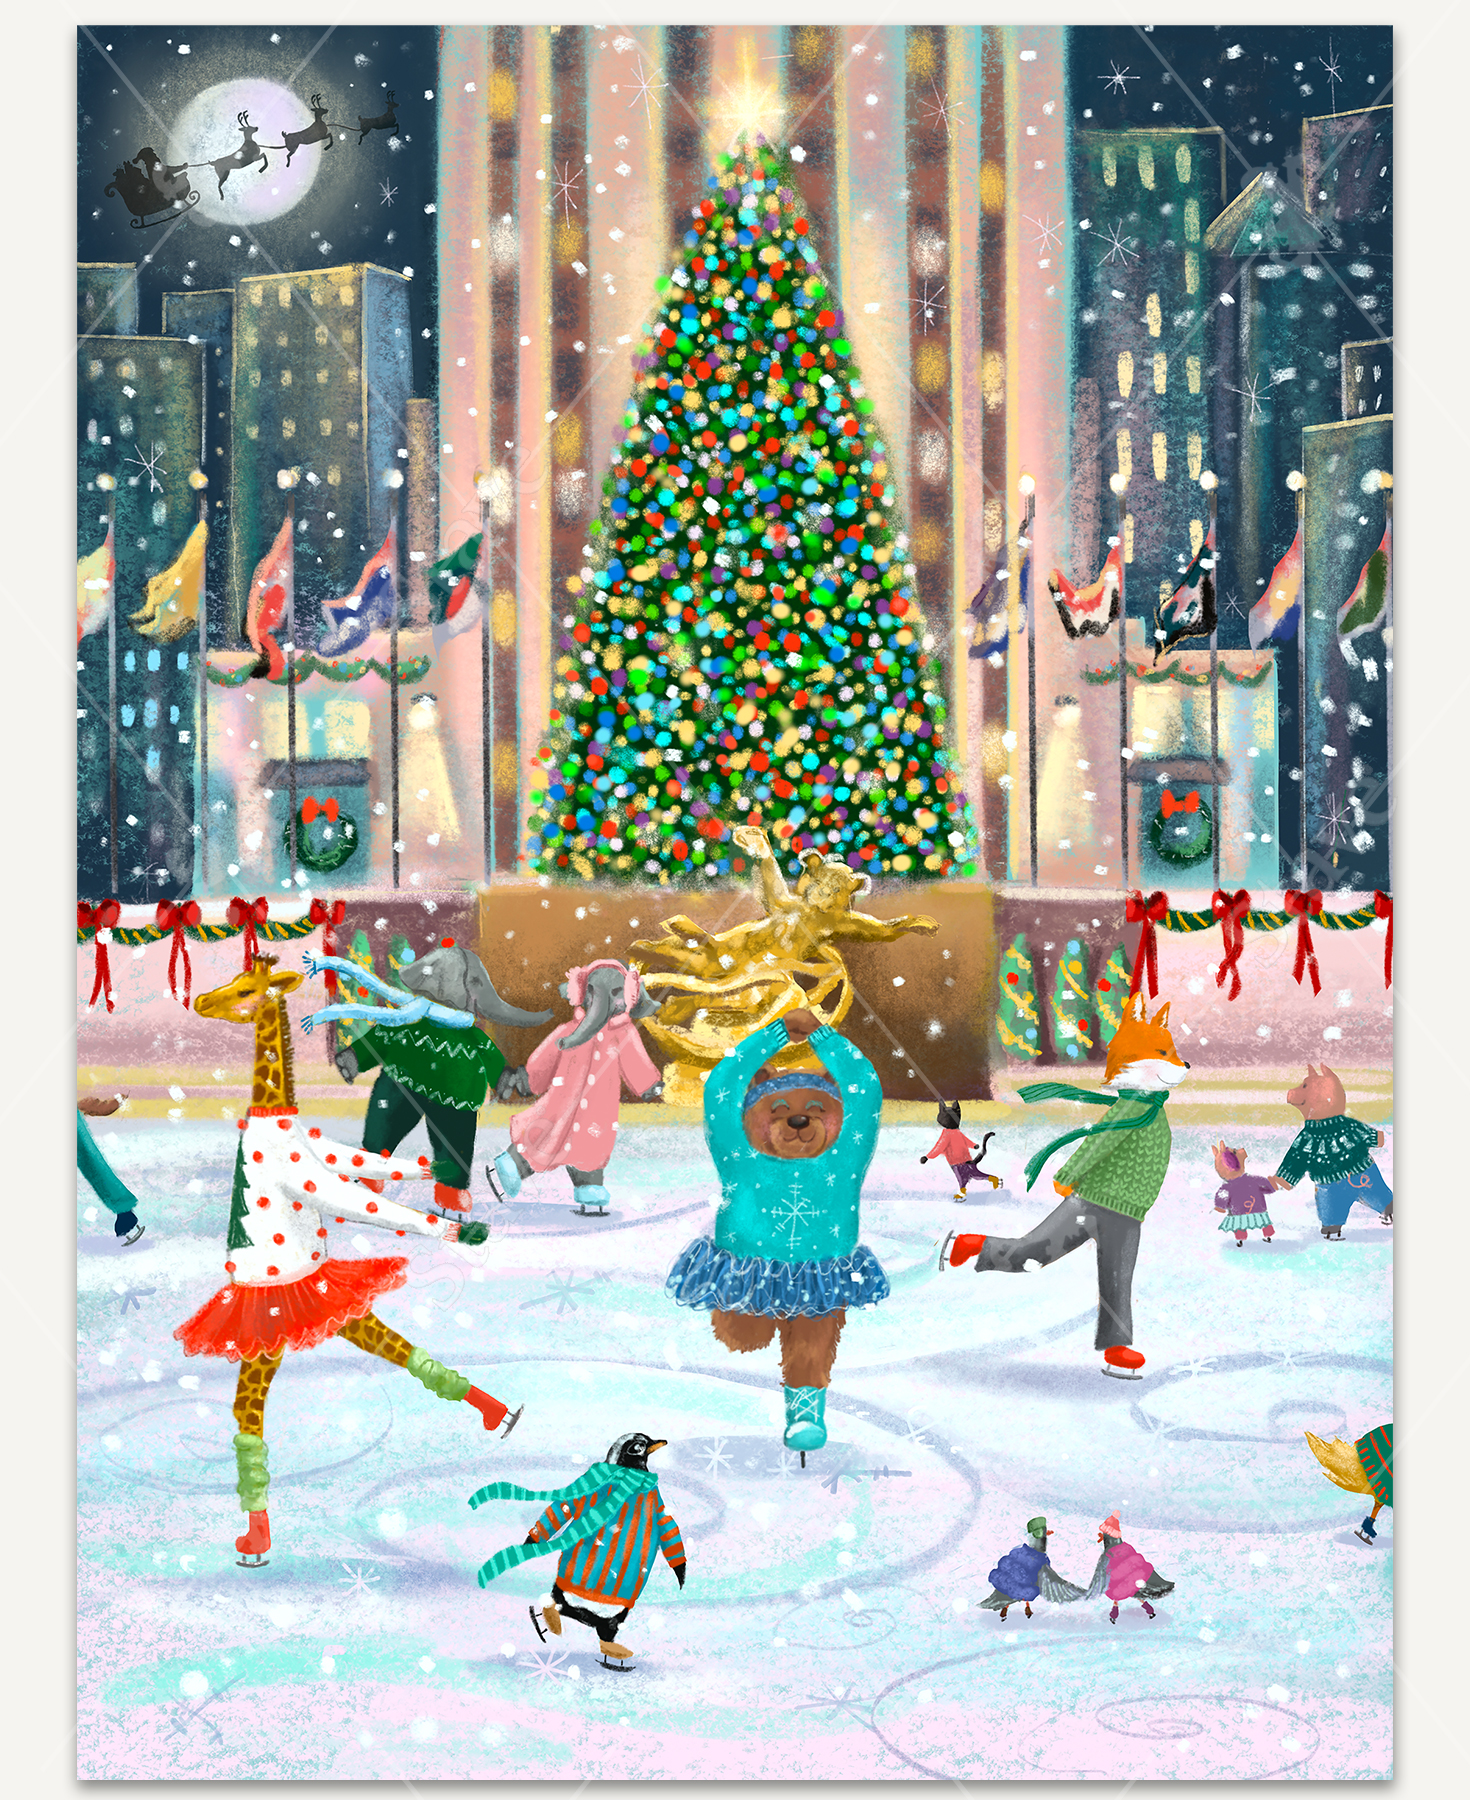 Rockefeller Skate Party wooden jigsaw puzzle manifests an evening scene of a group of animals dressed in their winter clothing and ice skates as they skate around the ice rink at Rockefeller Center. A bear can be seen twirling in the center of the ice as other animals skate around it, some are holding hands as they help each other on the ice. In the background,a bright christmas tree lights up the space and city buildings stretch up towards the sky around the scene. In the top left corner a silhouette of santa and his reindeer are seen flying in the sky, in front of the moon.